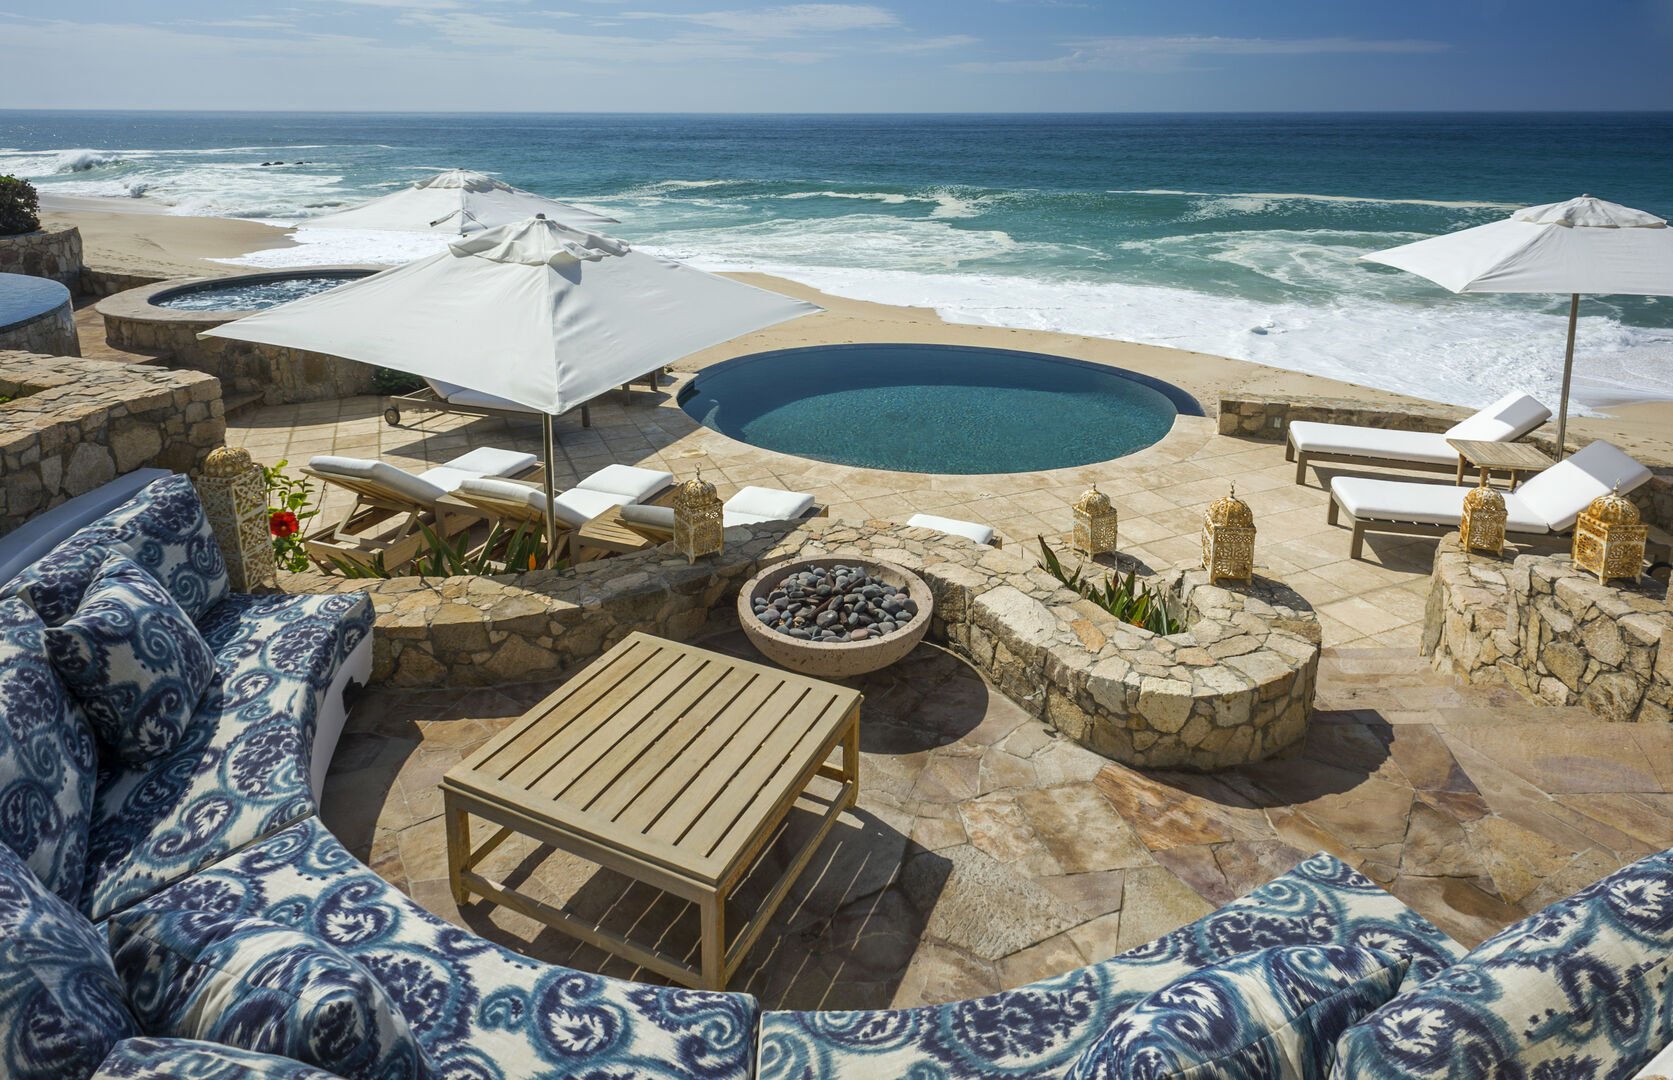 Outdoor lounge area with lounge chairs, parasols and a pool